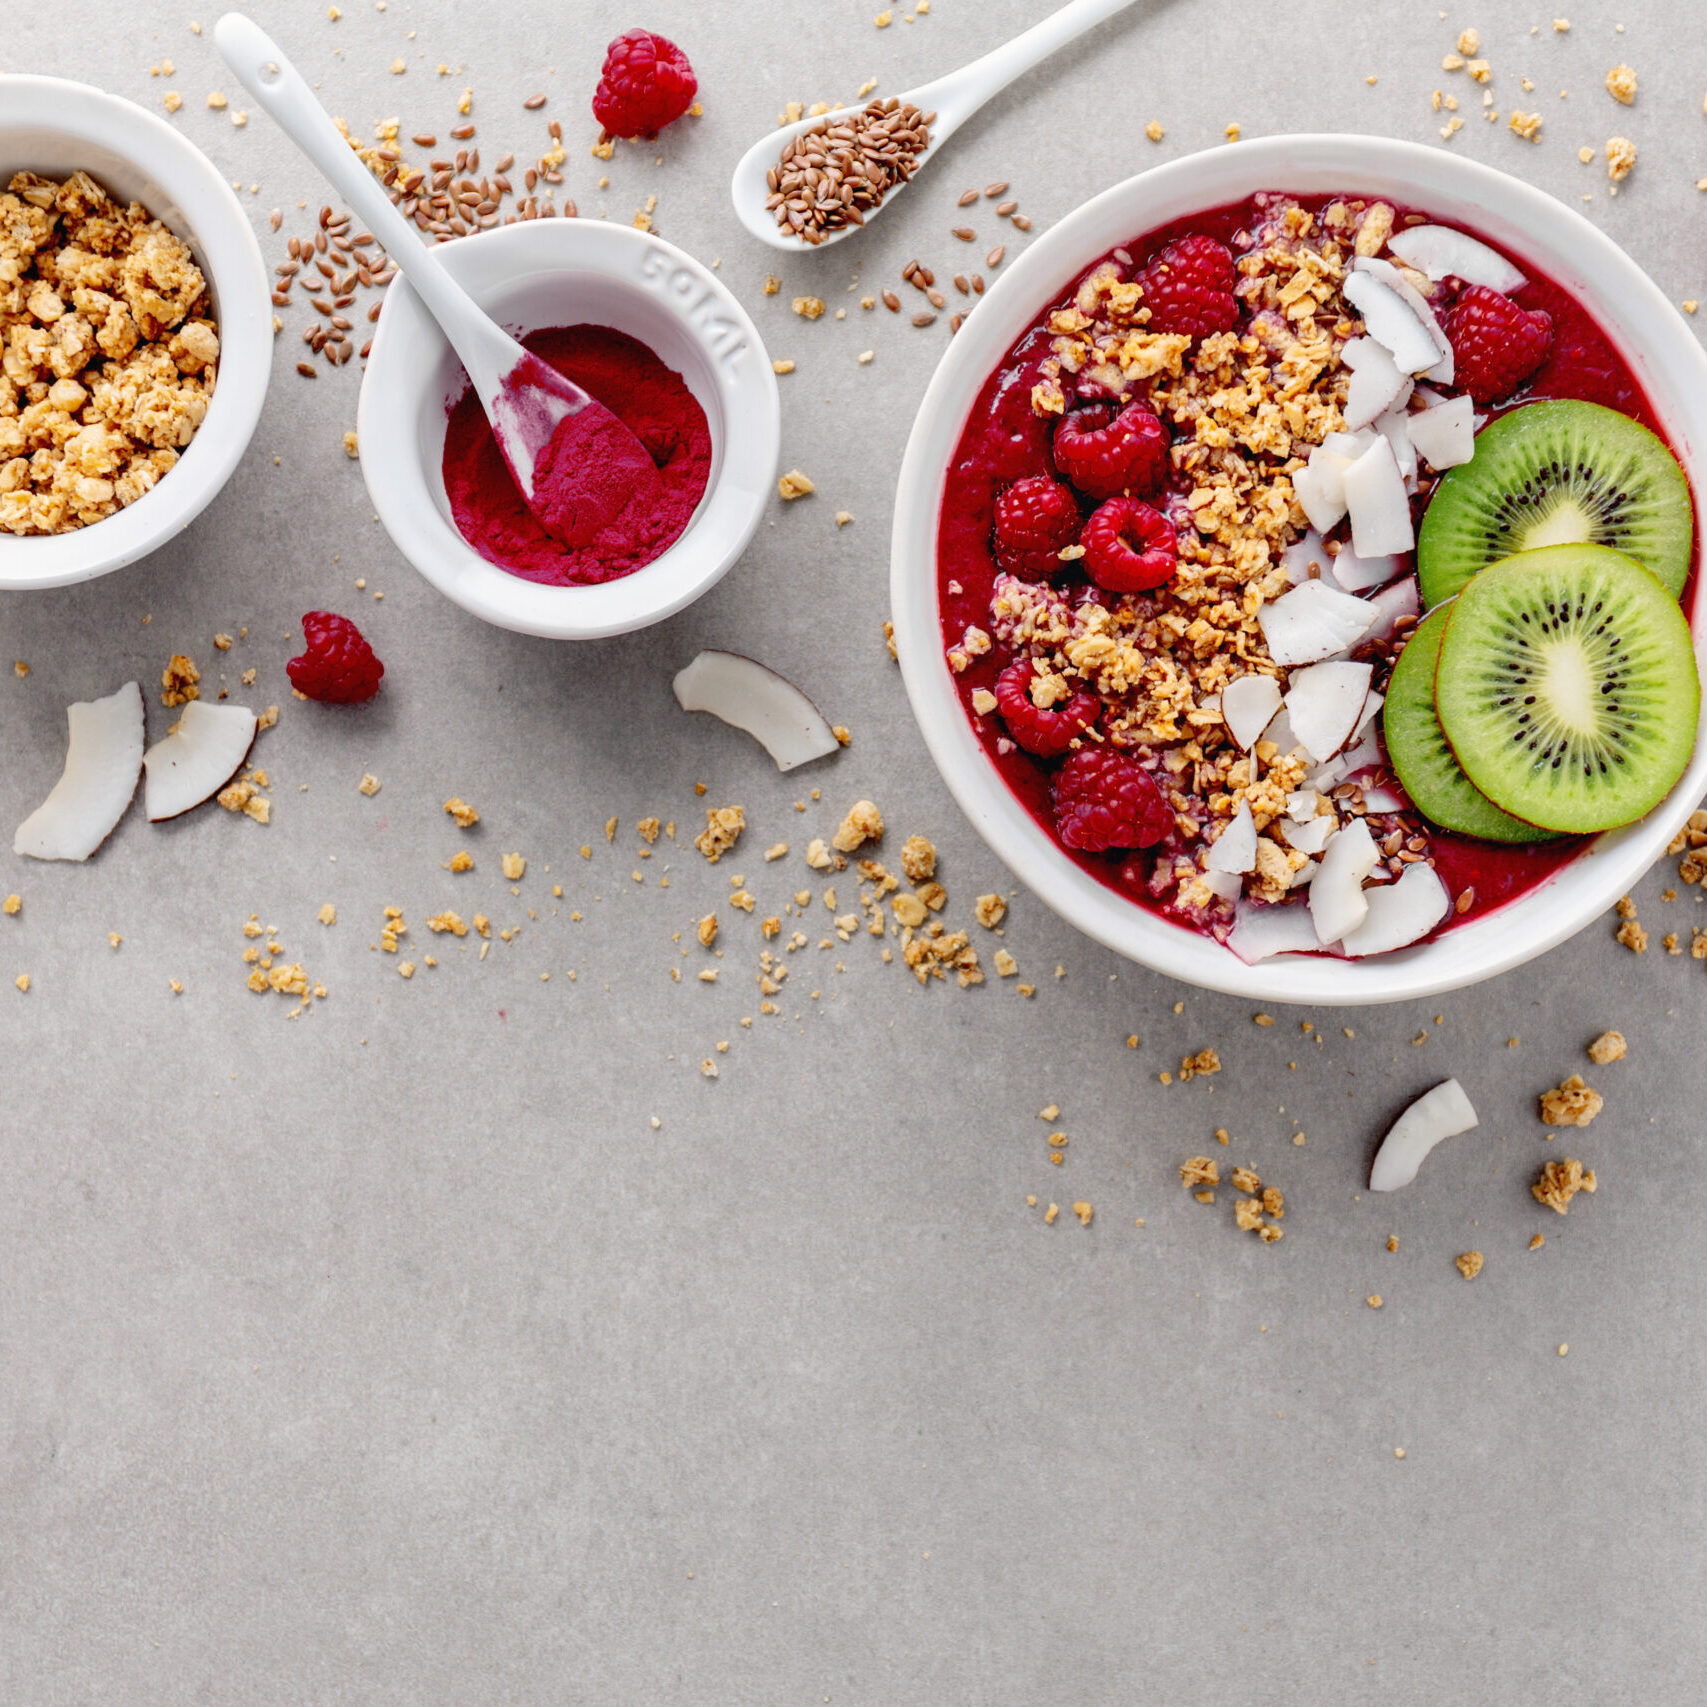 Tasty appetizing homemade smoothie bowl made from fresh berries, served with muesli granola and coconut flakes. Grey background. Top View with Copy Space.